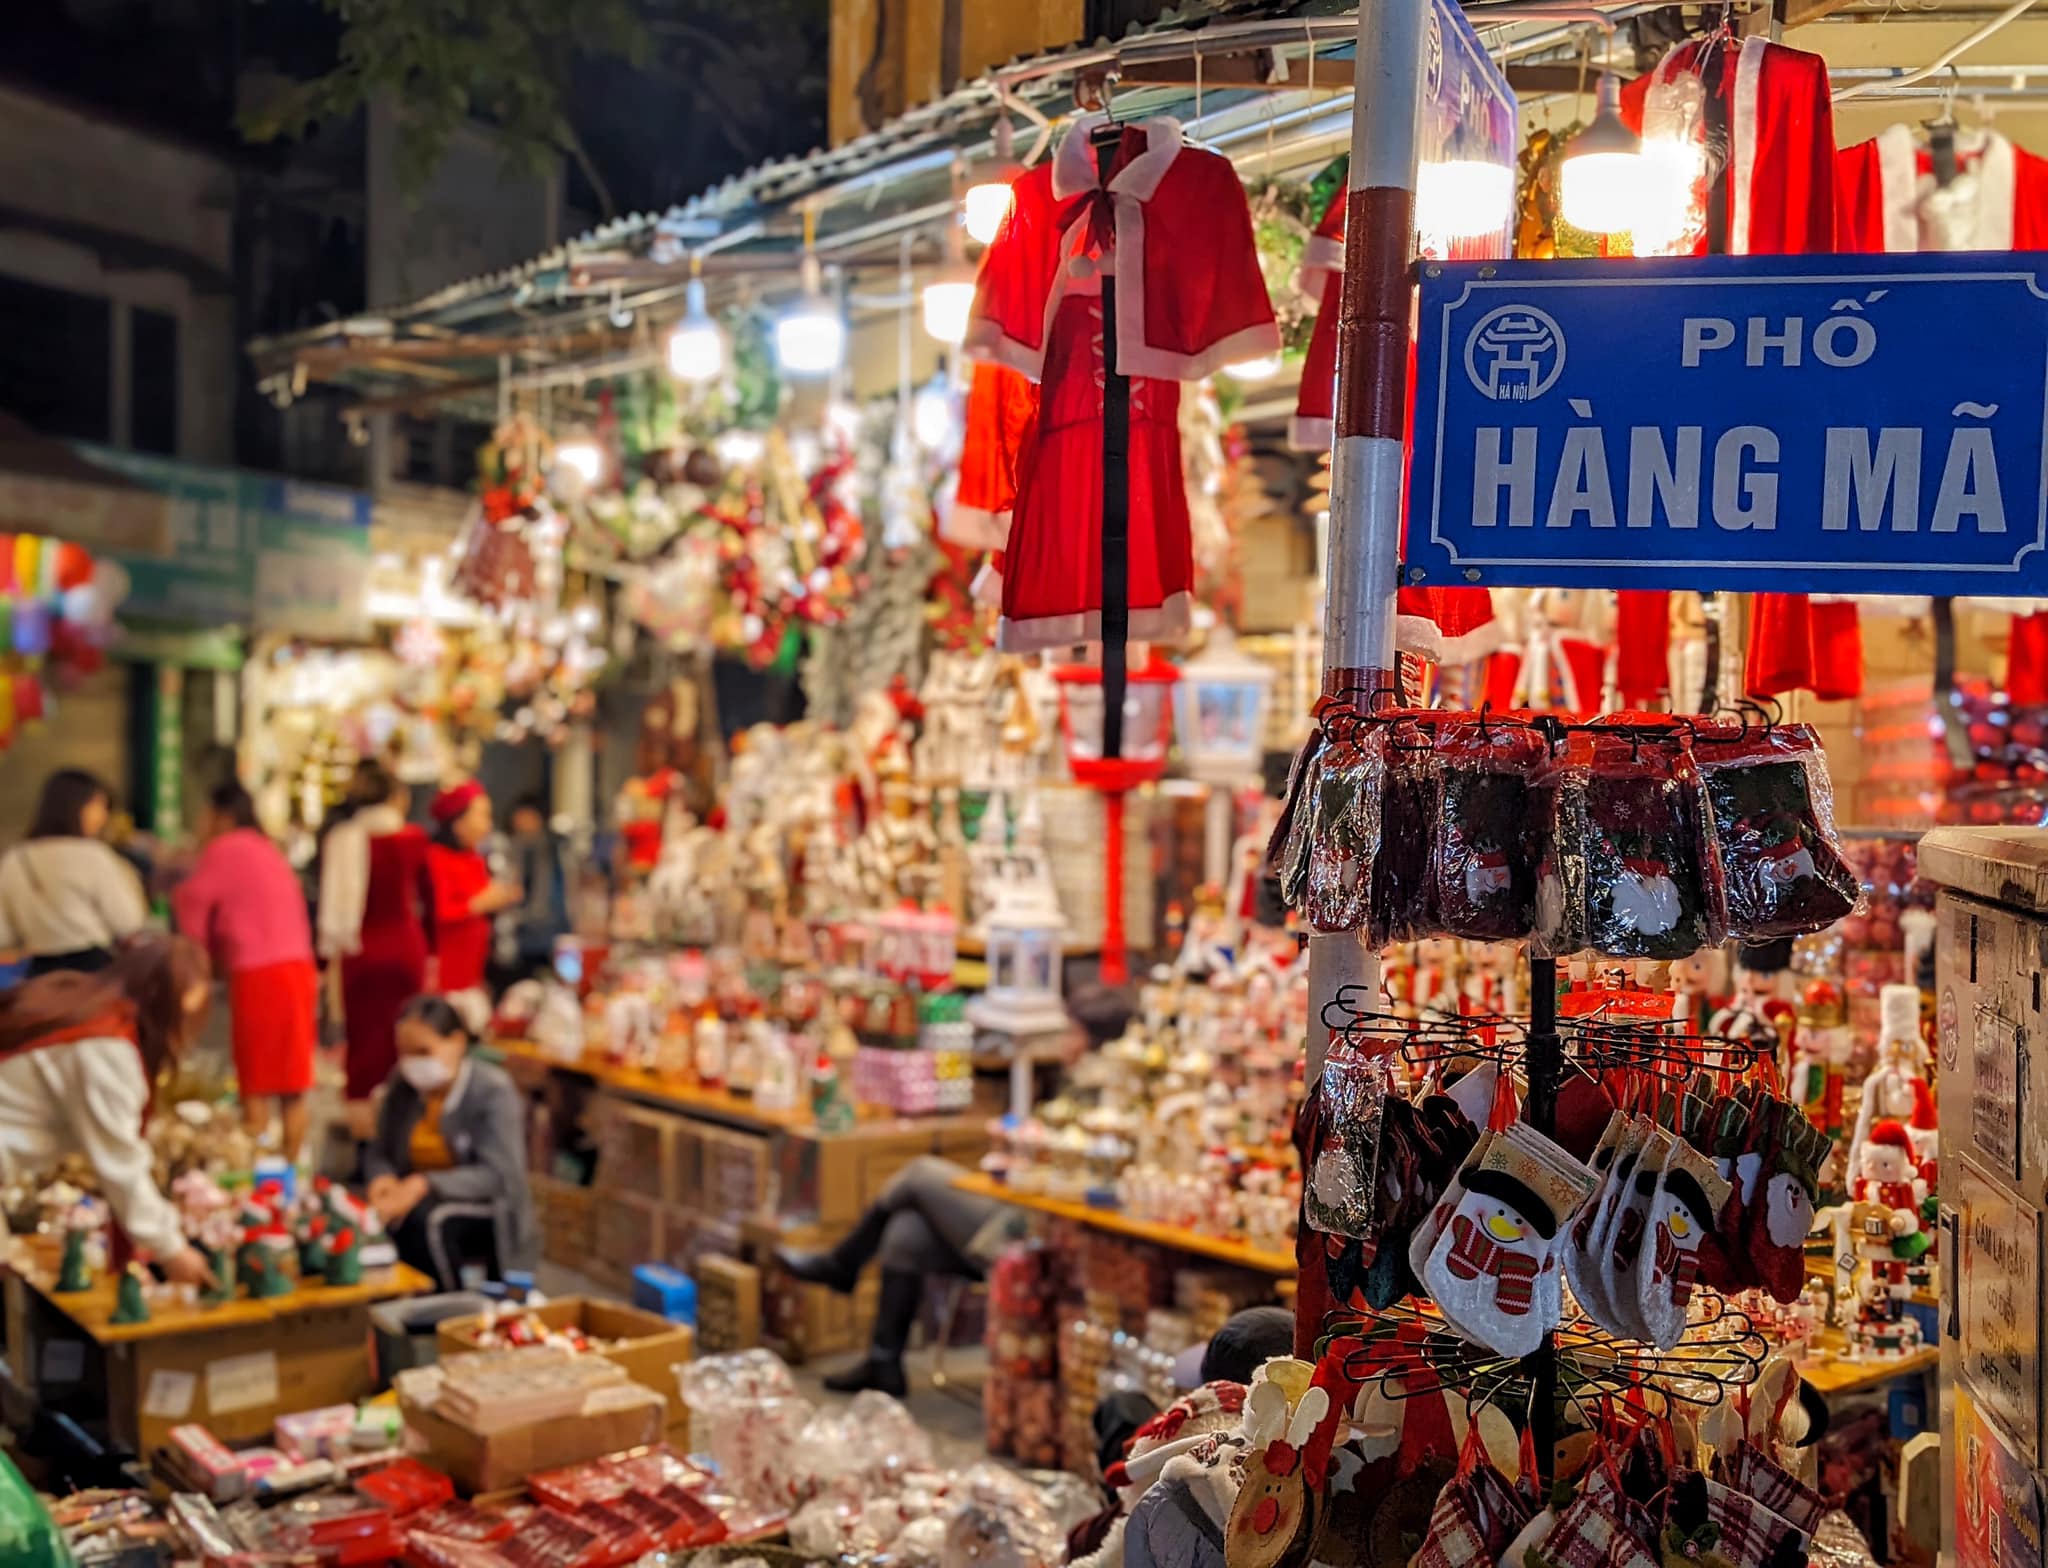 The Christmas atmosphere filled the streets of Hanoi